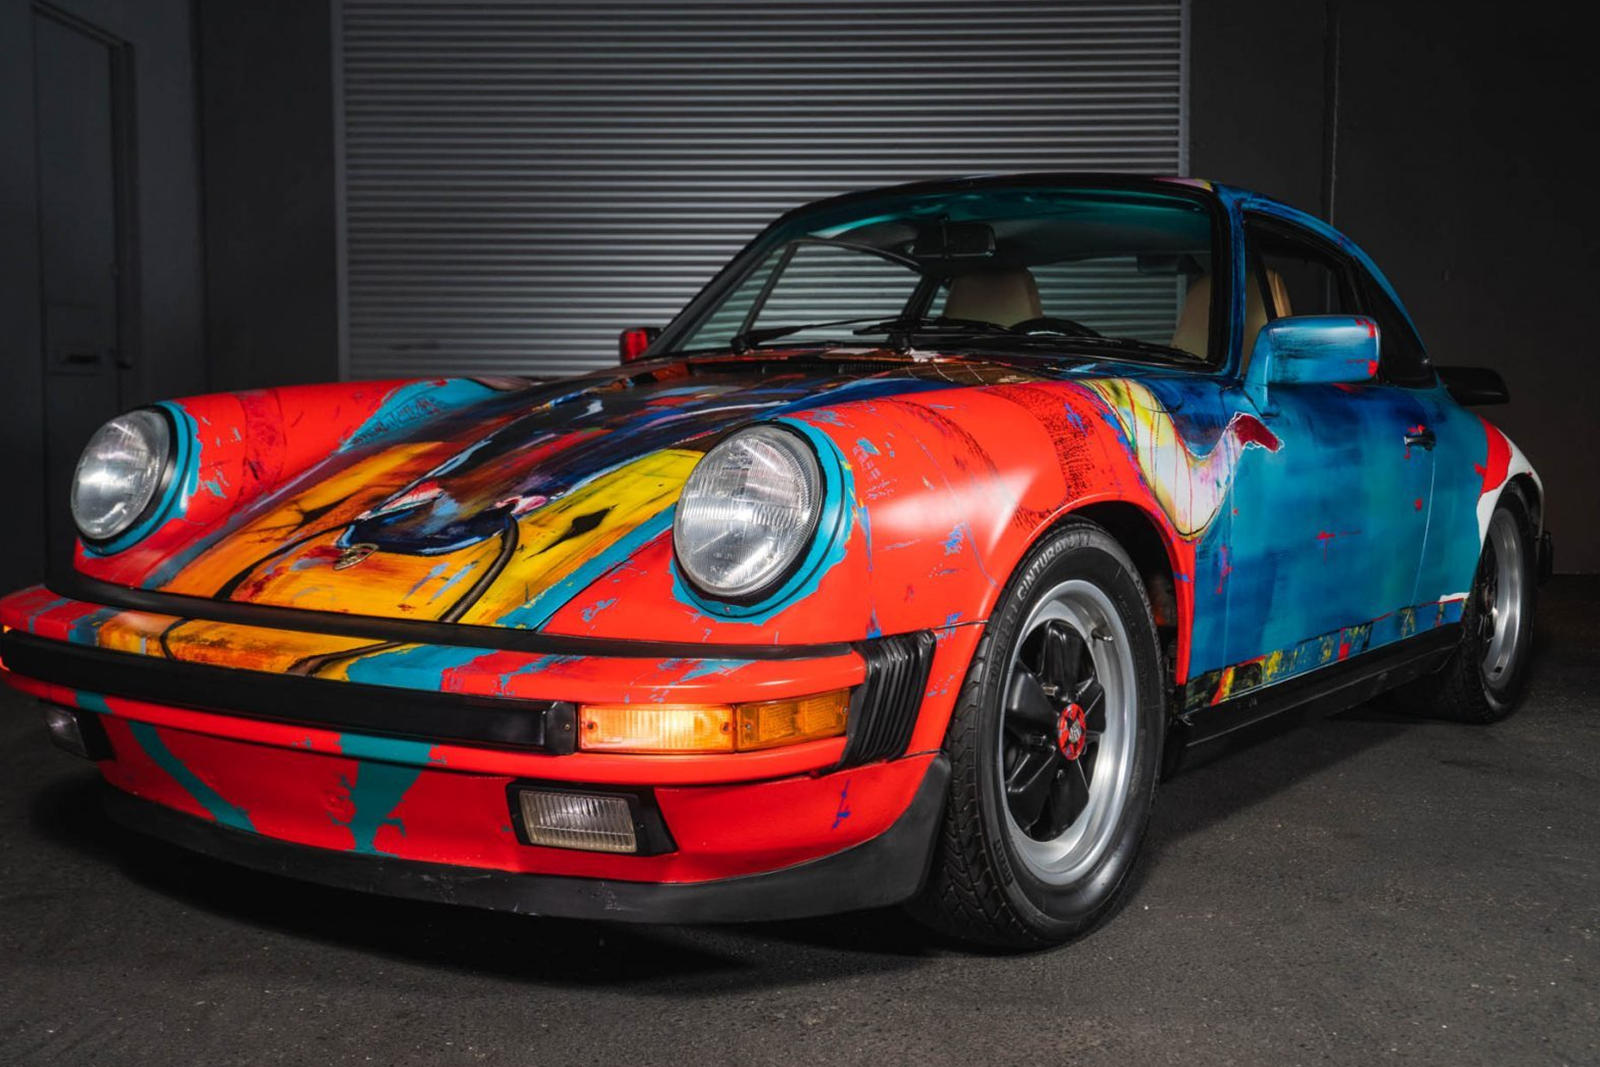 photo of This Colorful Porsche 911 Art Car Is One-Of-Kind image